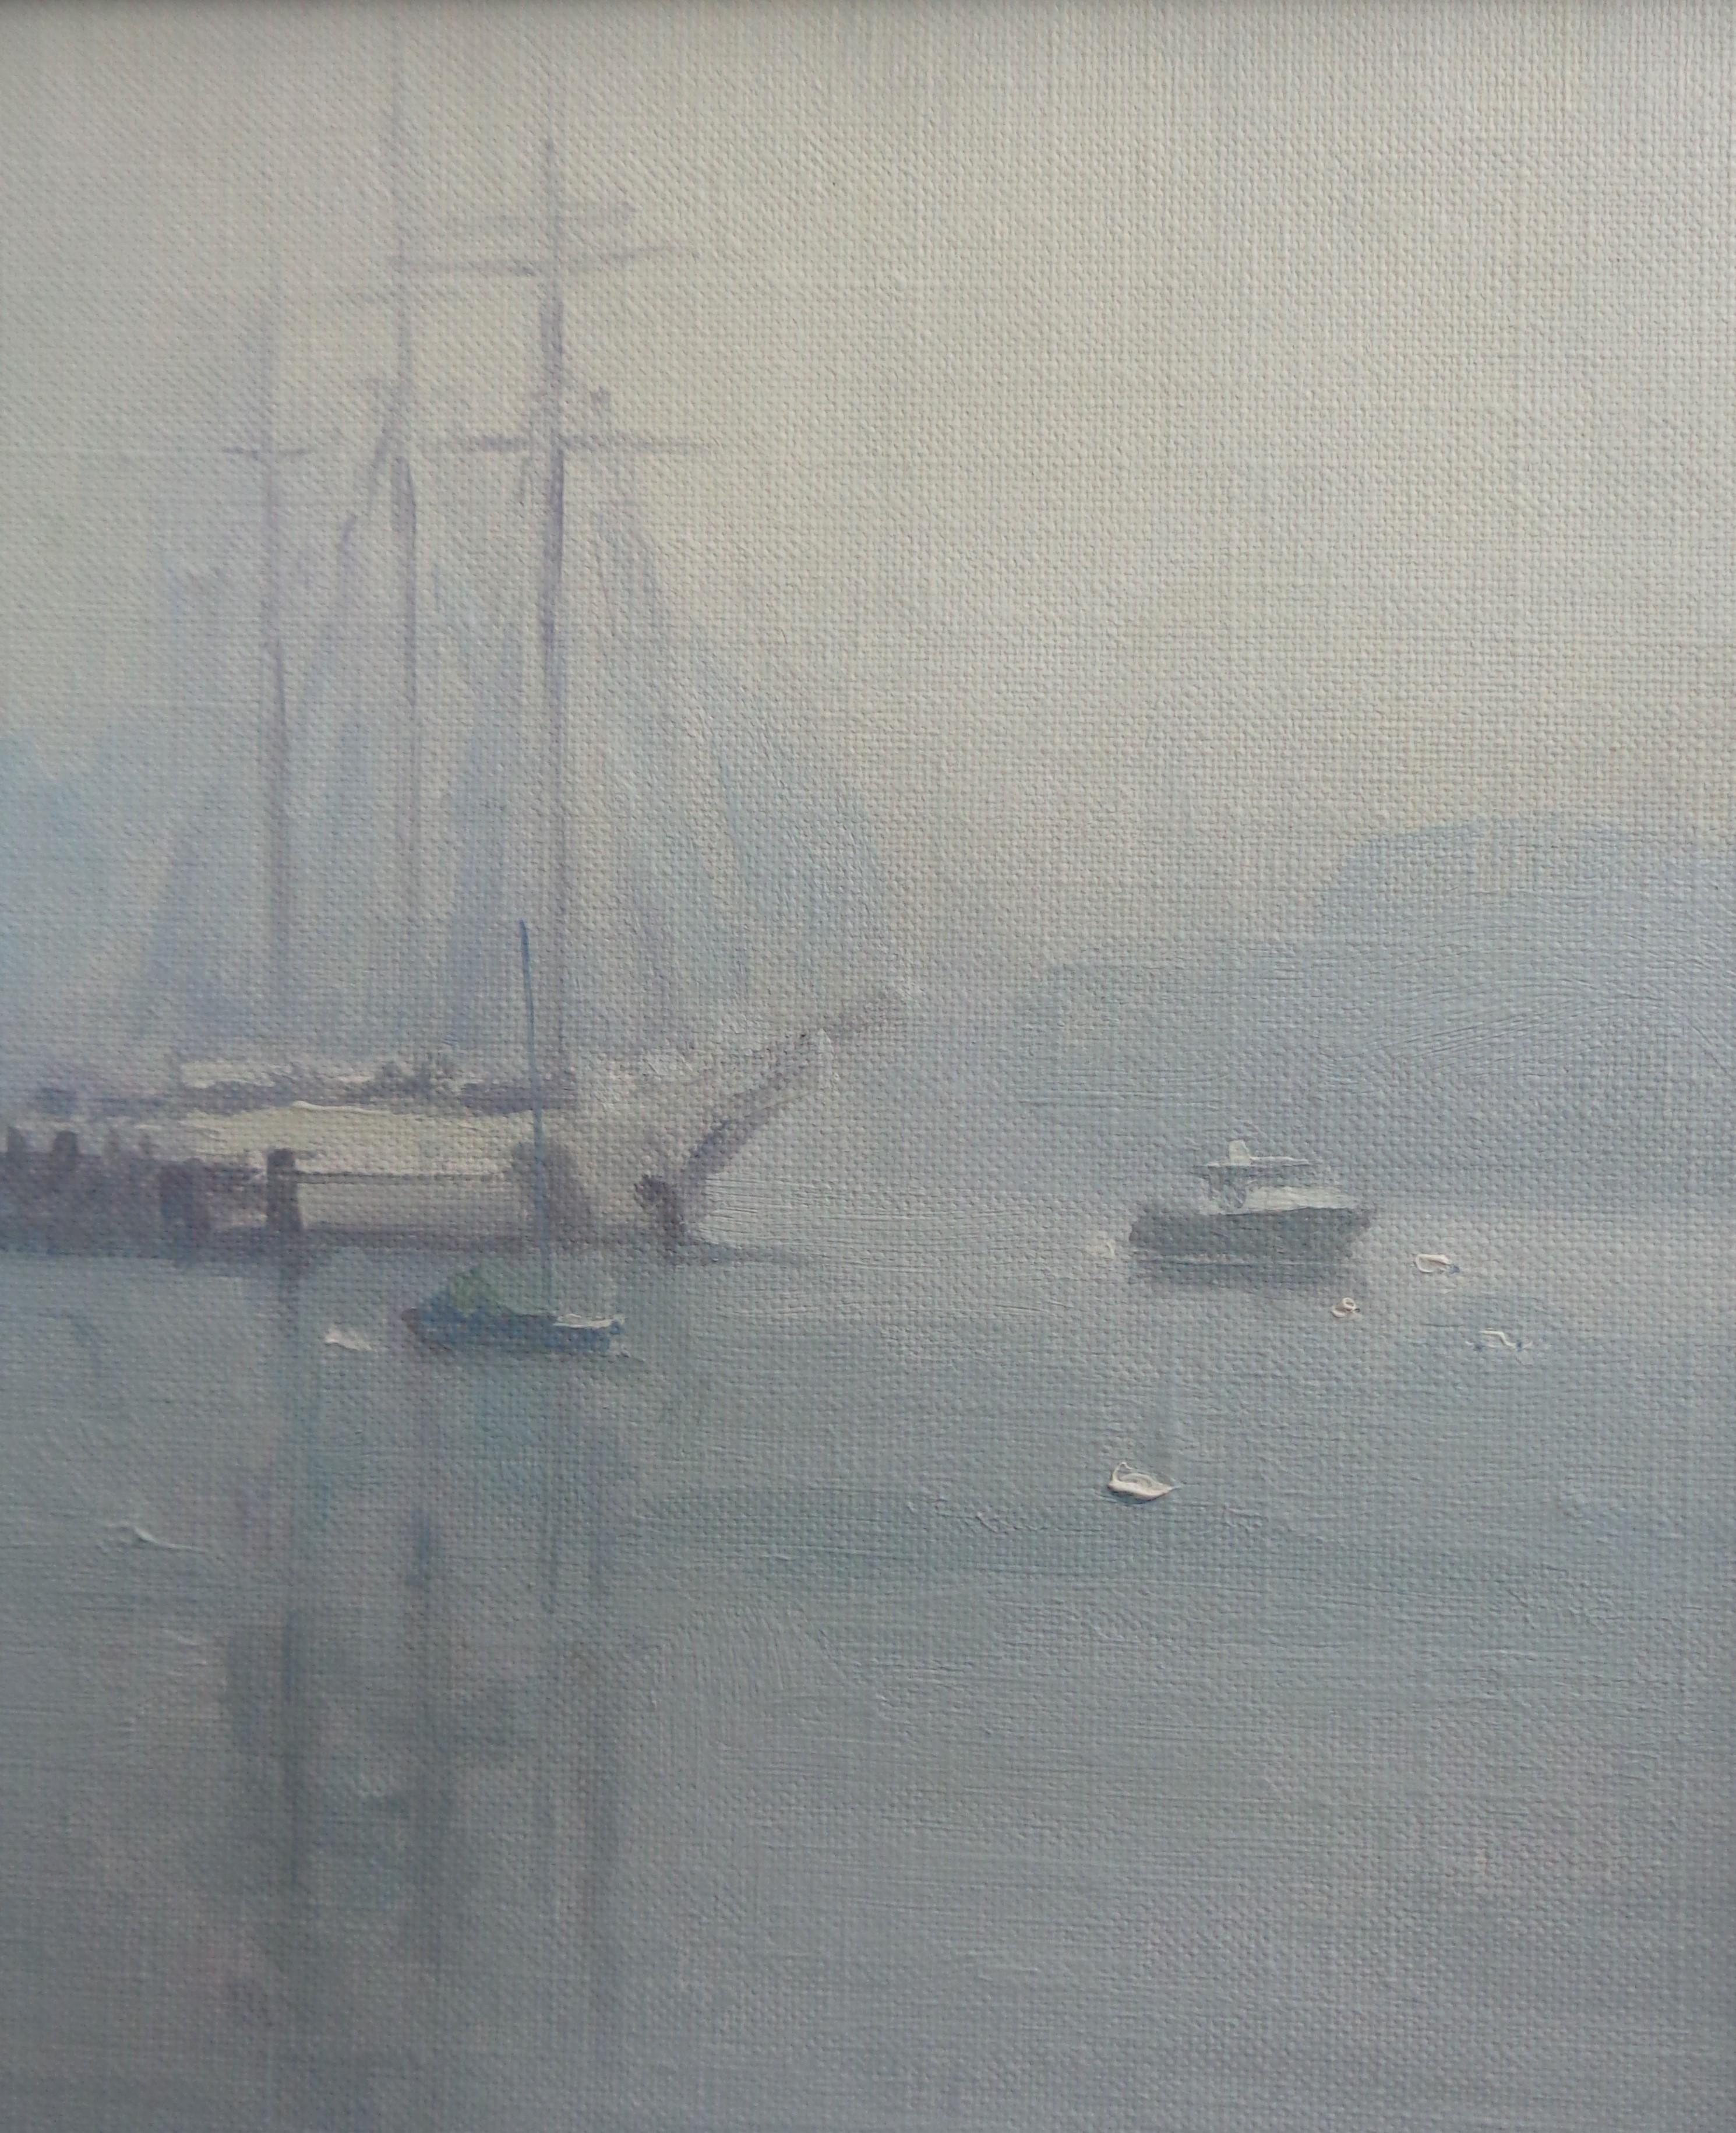 Boat Beach Ocean Impressionistic Seascape Painting Michael Budden Mystic Seaport For Sale 3